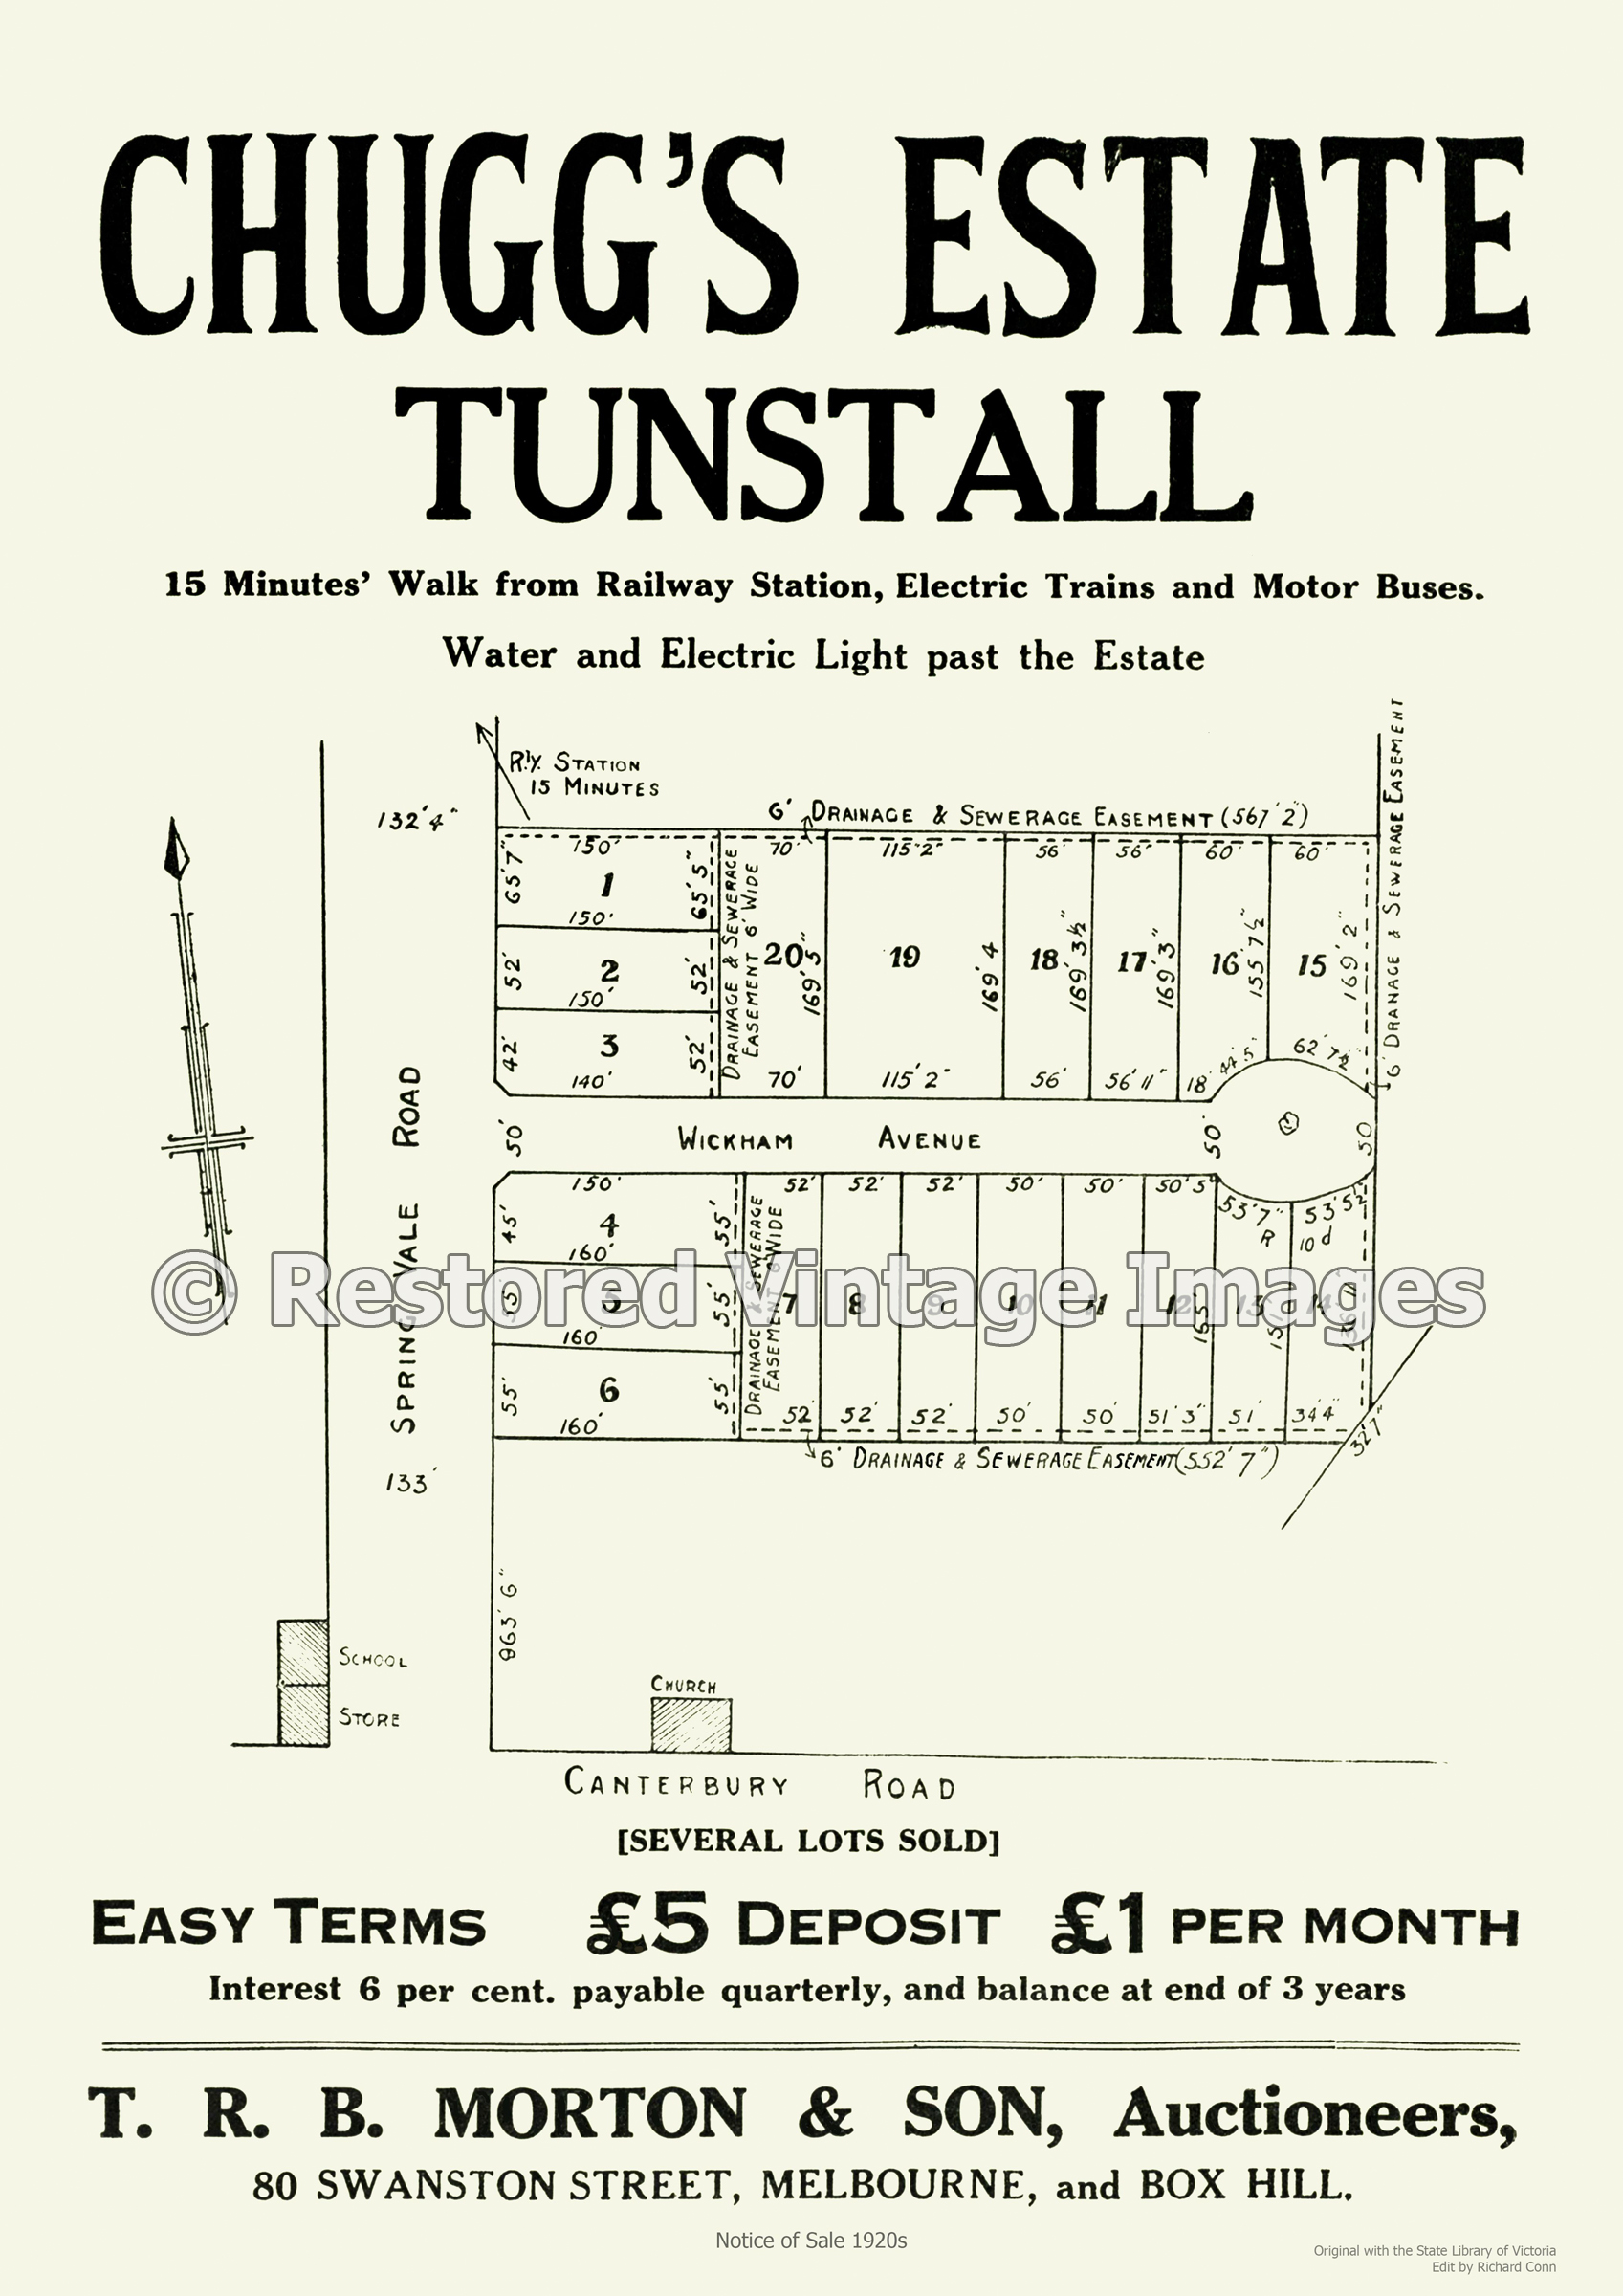 Chugg’s Estate Tunstall 1920s – Forest Hill